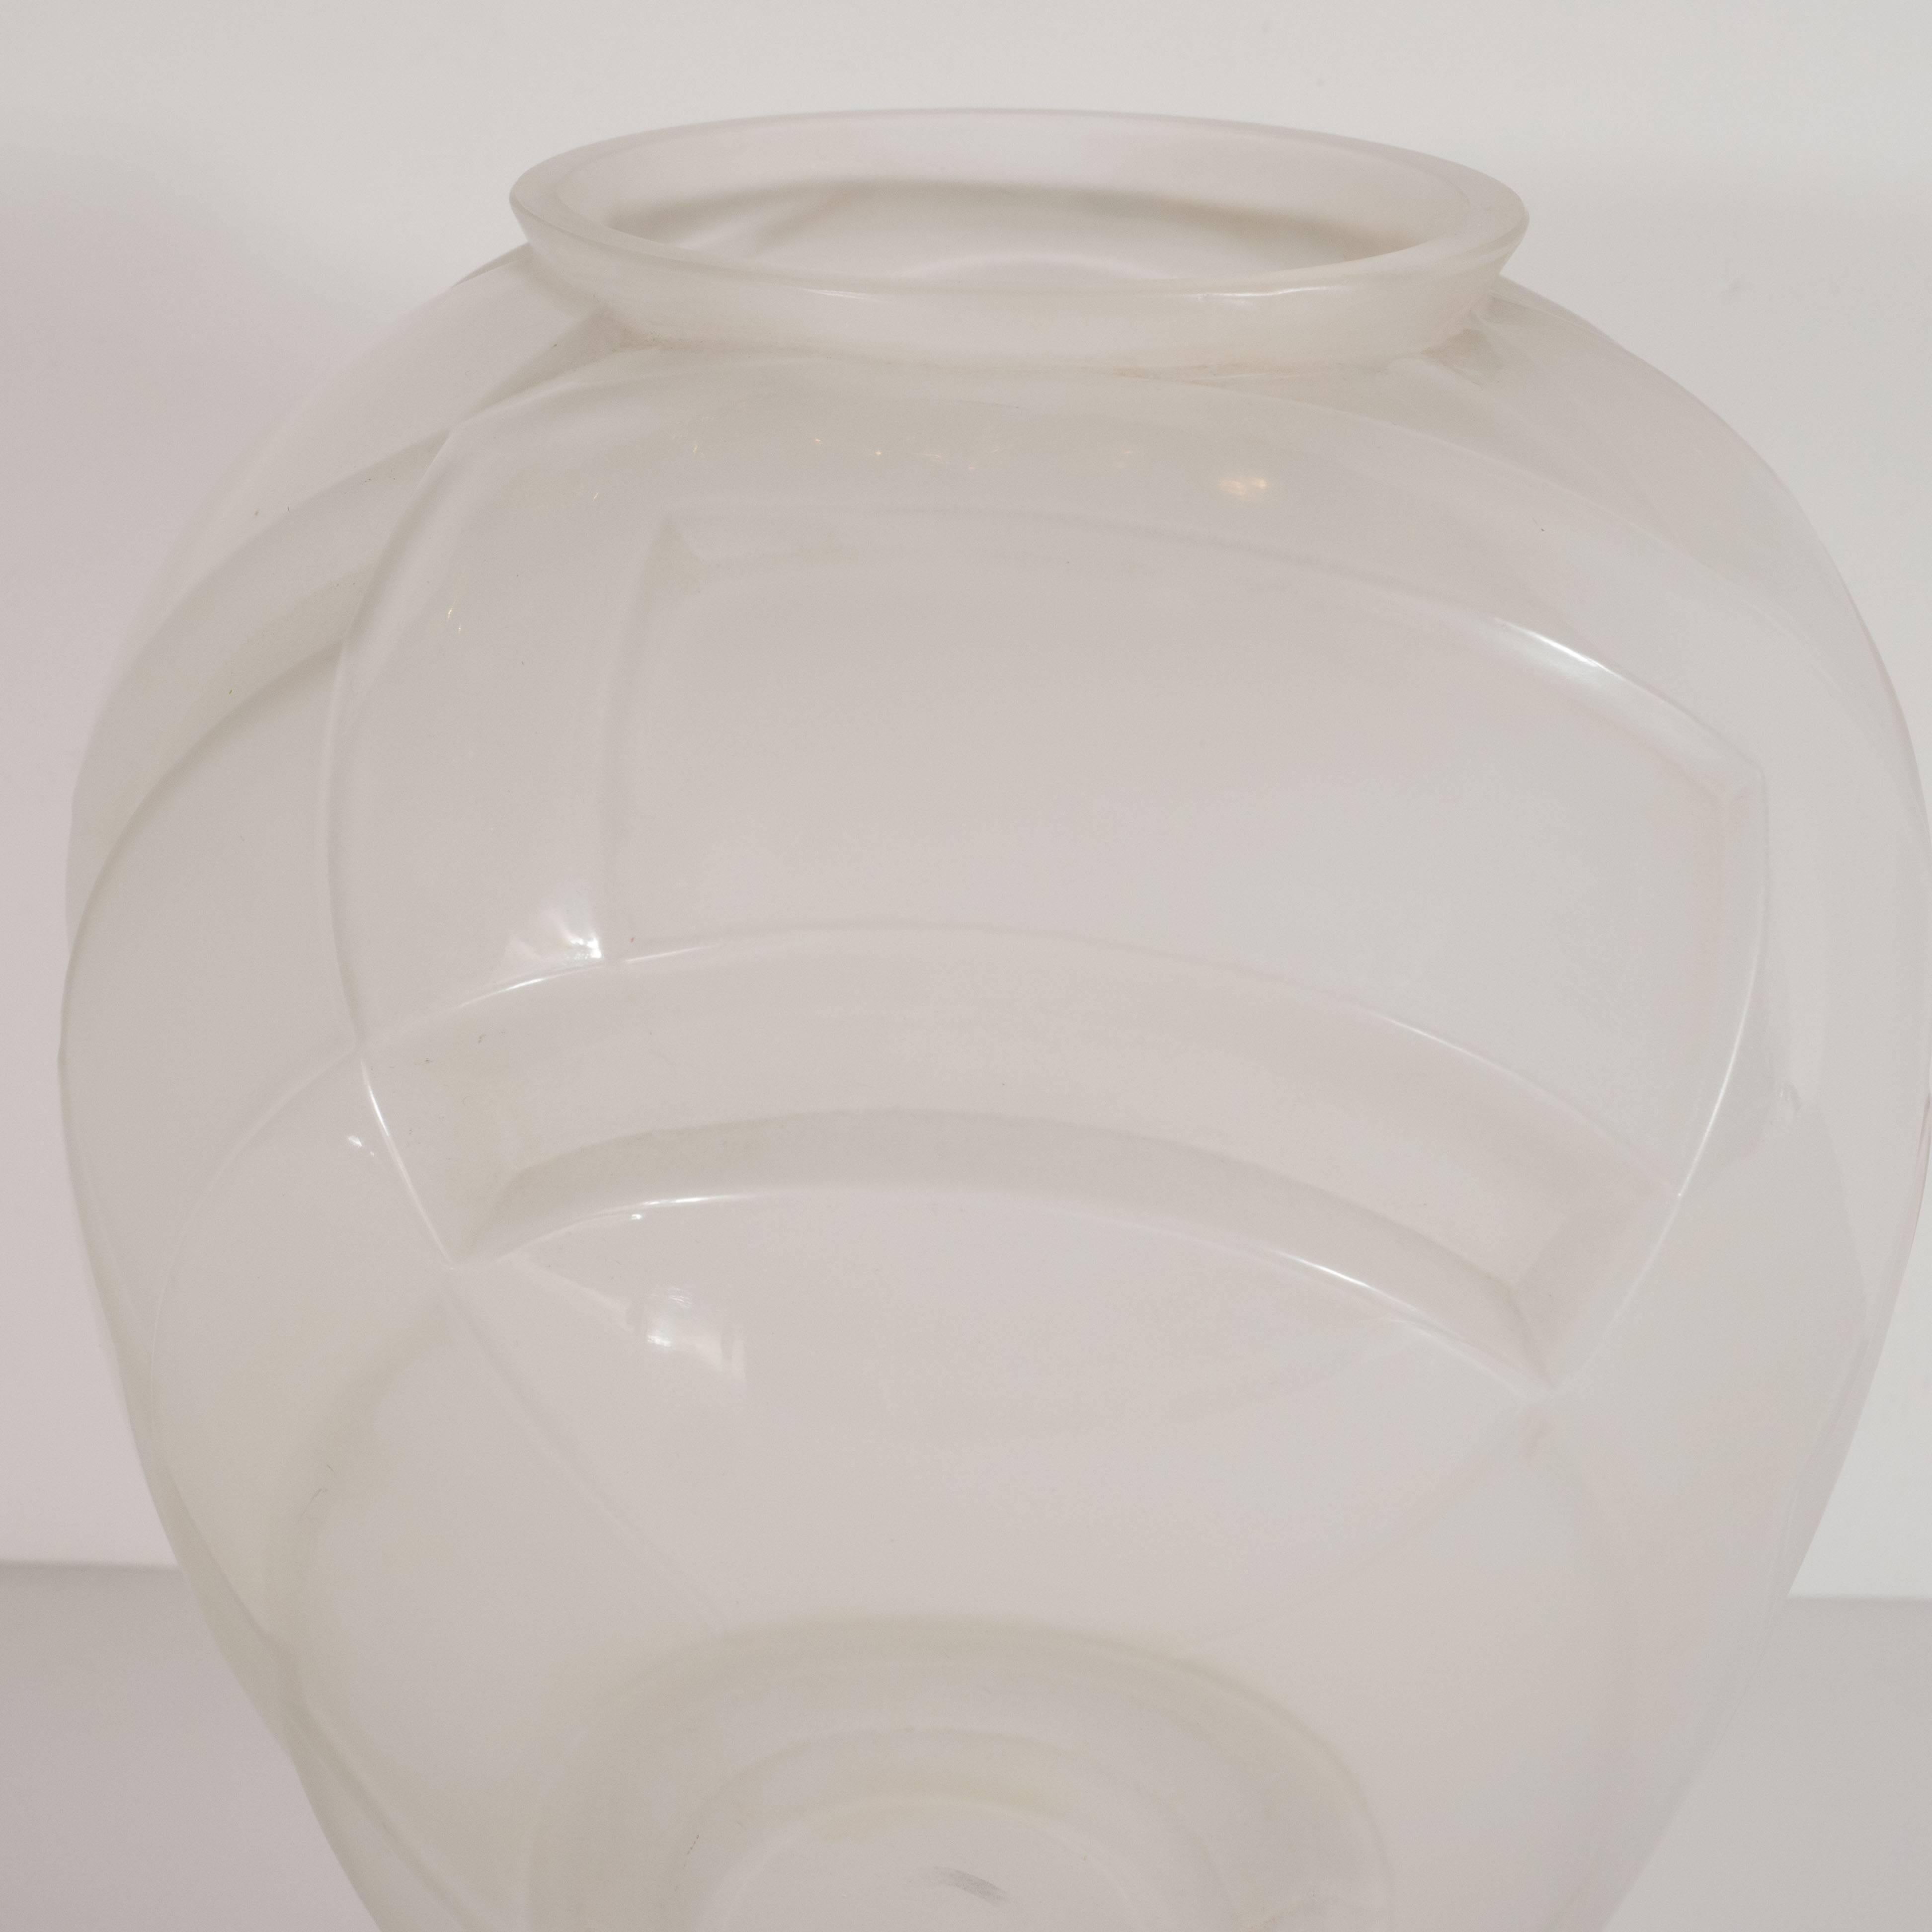 This refined glass vase was handblown by Andre Hunebelle, one of the finest glass blowing studios of the period- in France, circa 1930. It offers curvilinear cubist geometric patterns etched in the glass throughout, and a gently expanding body that